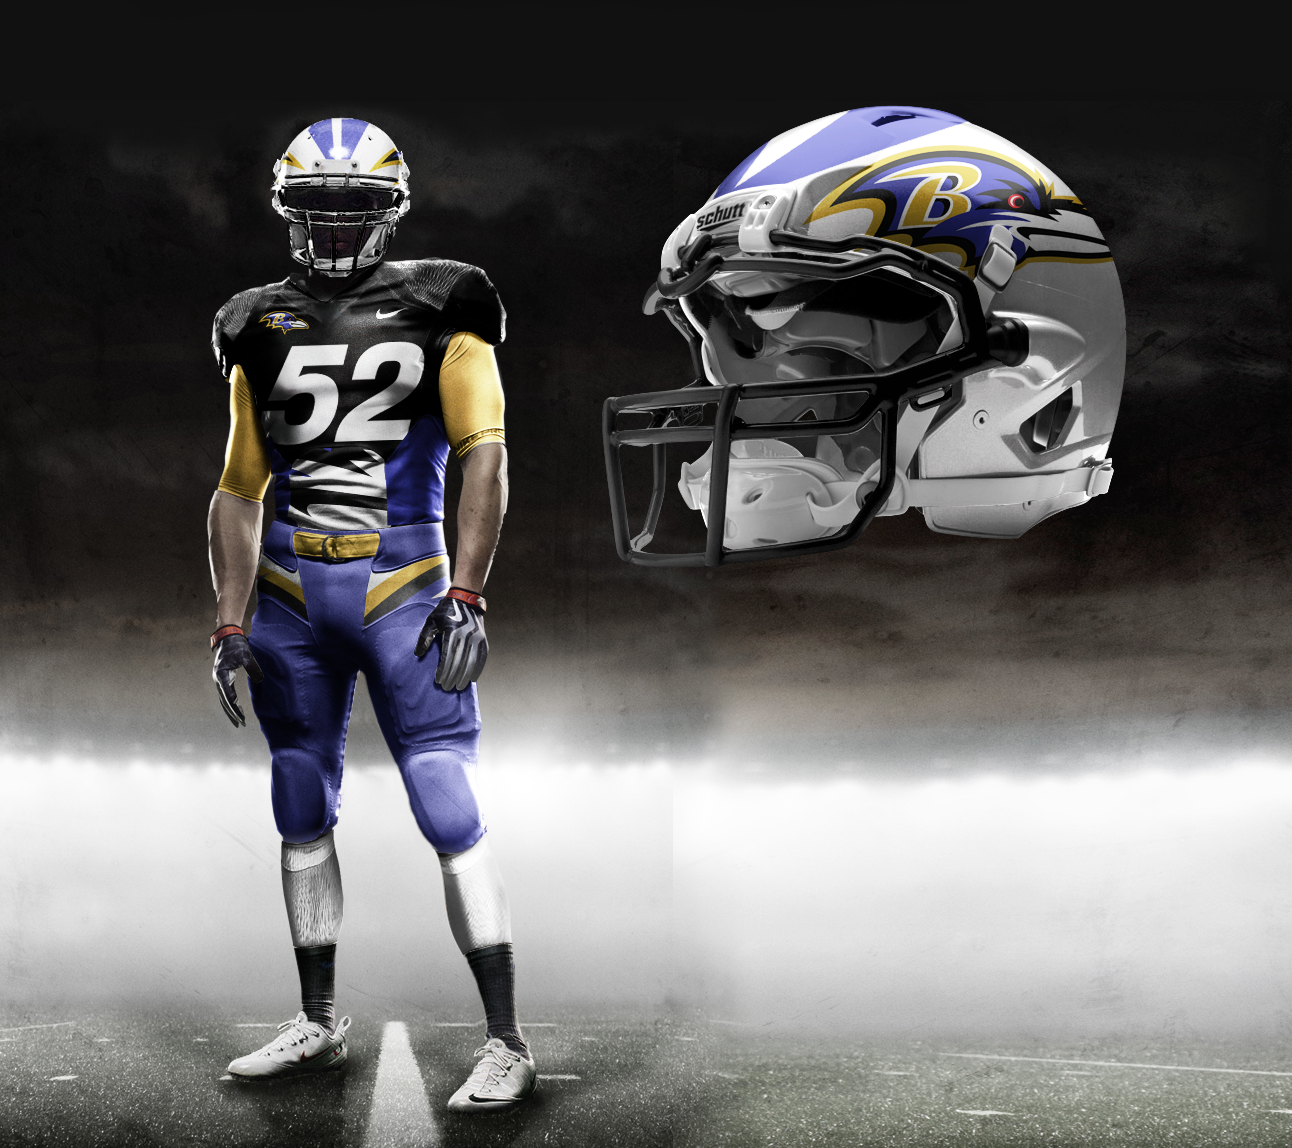 what color are the baltimore ravens uniforms